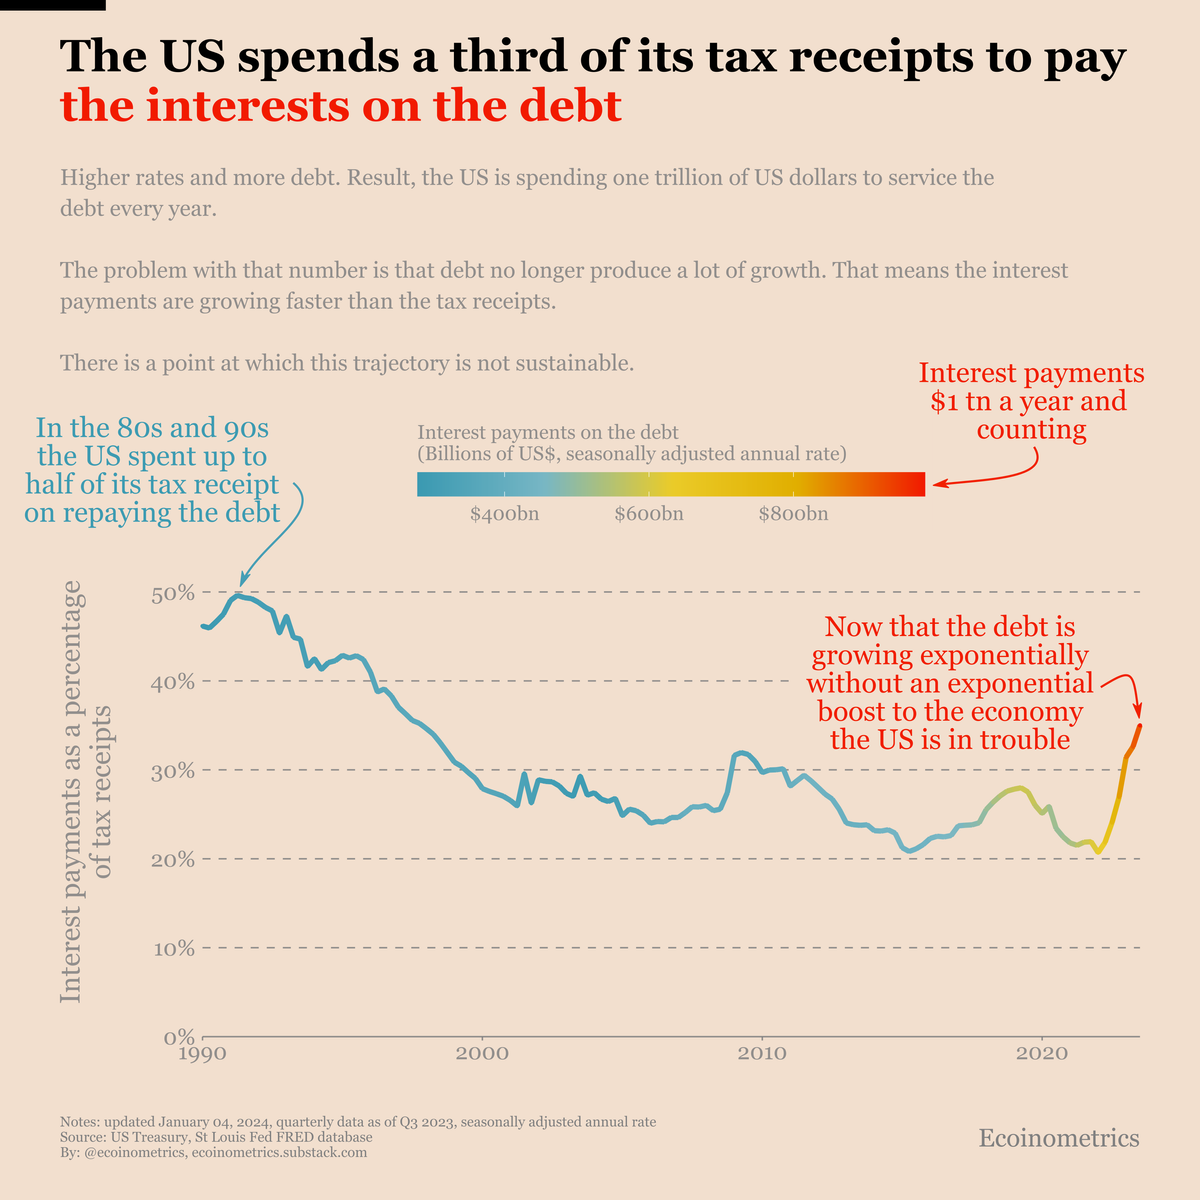 The US spends a third of its tax revenues to pay the interests on the debt